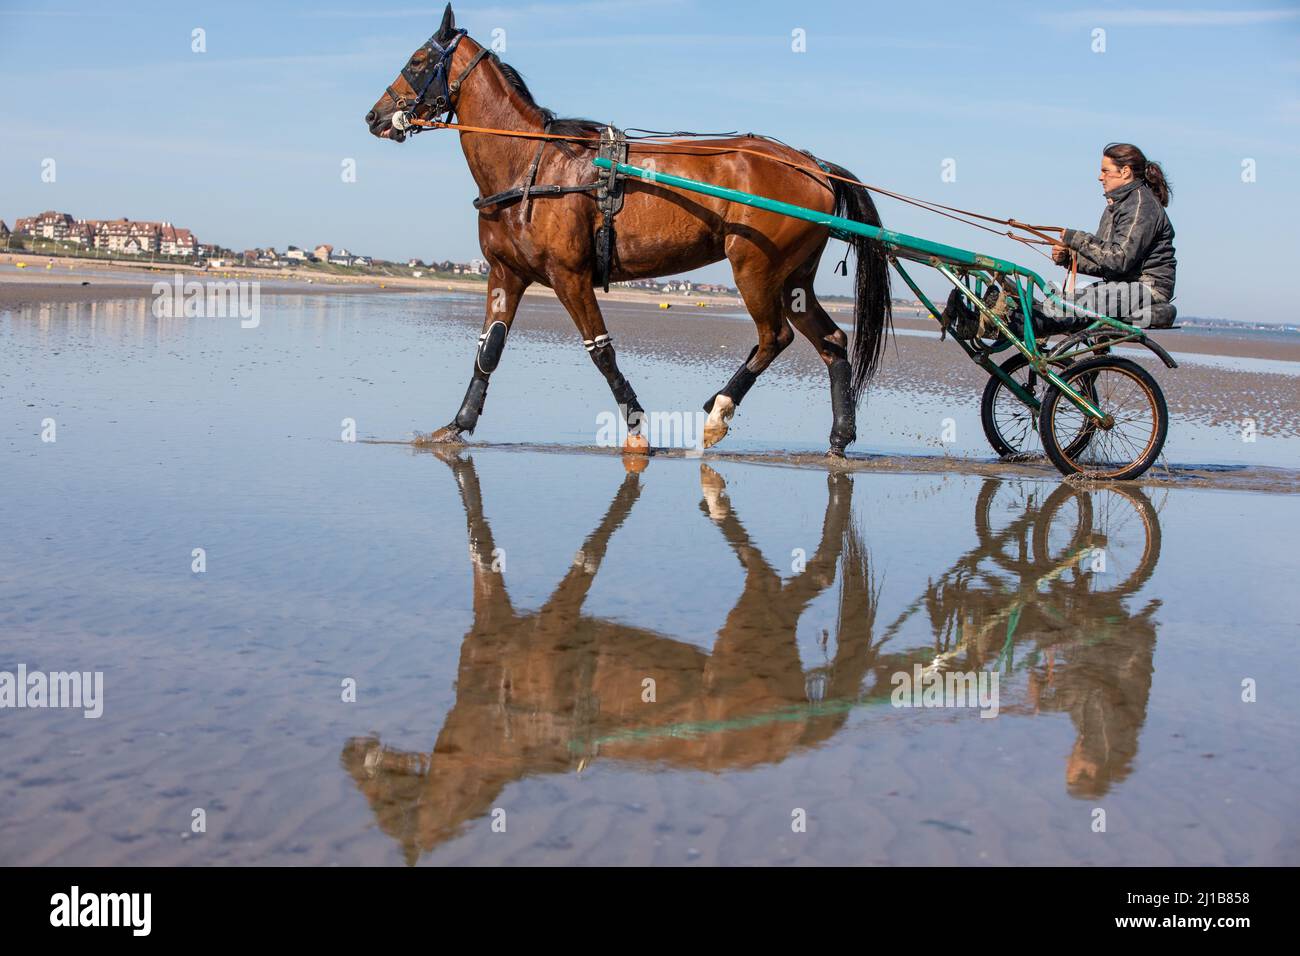 TRAINING OF THE HARNESS-RACING HORSES ON THE BEACH OF CABOURG, CALVADOS, NORMANDY, FRANCE Stock Photo